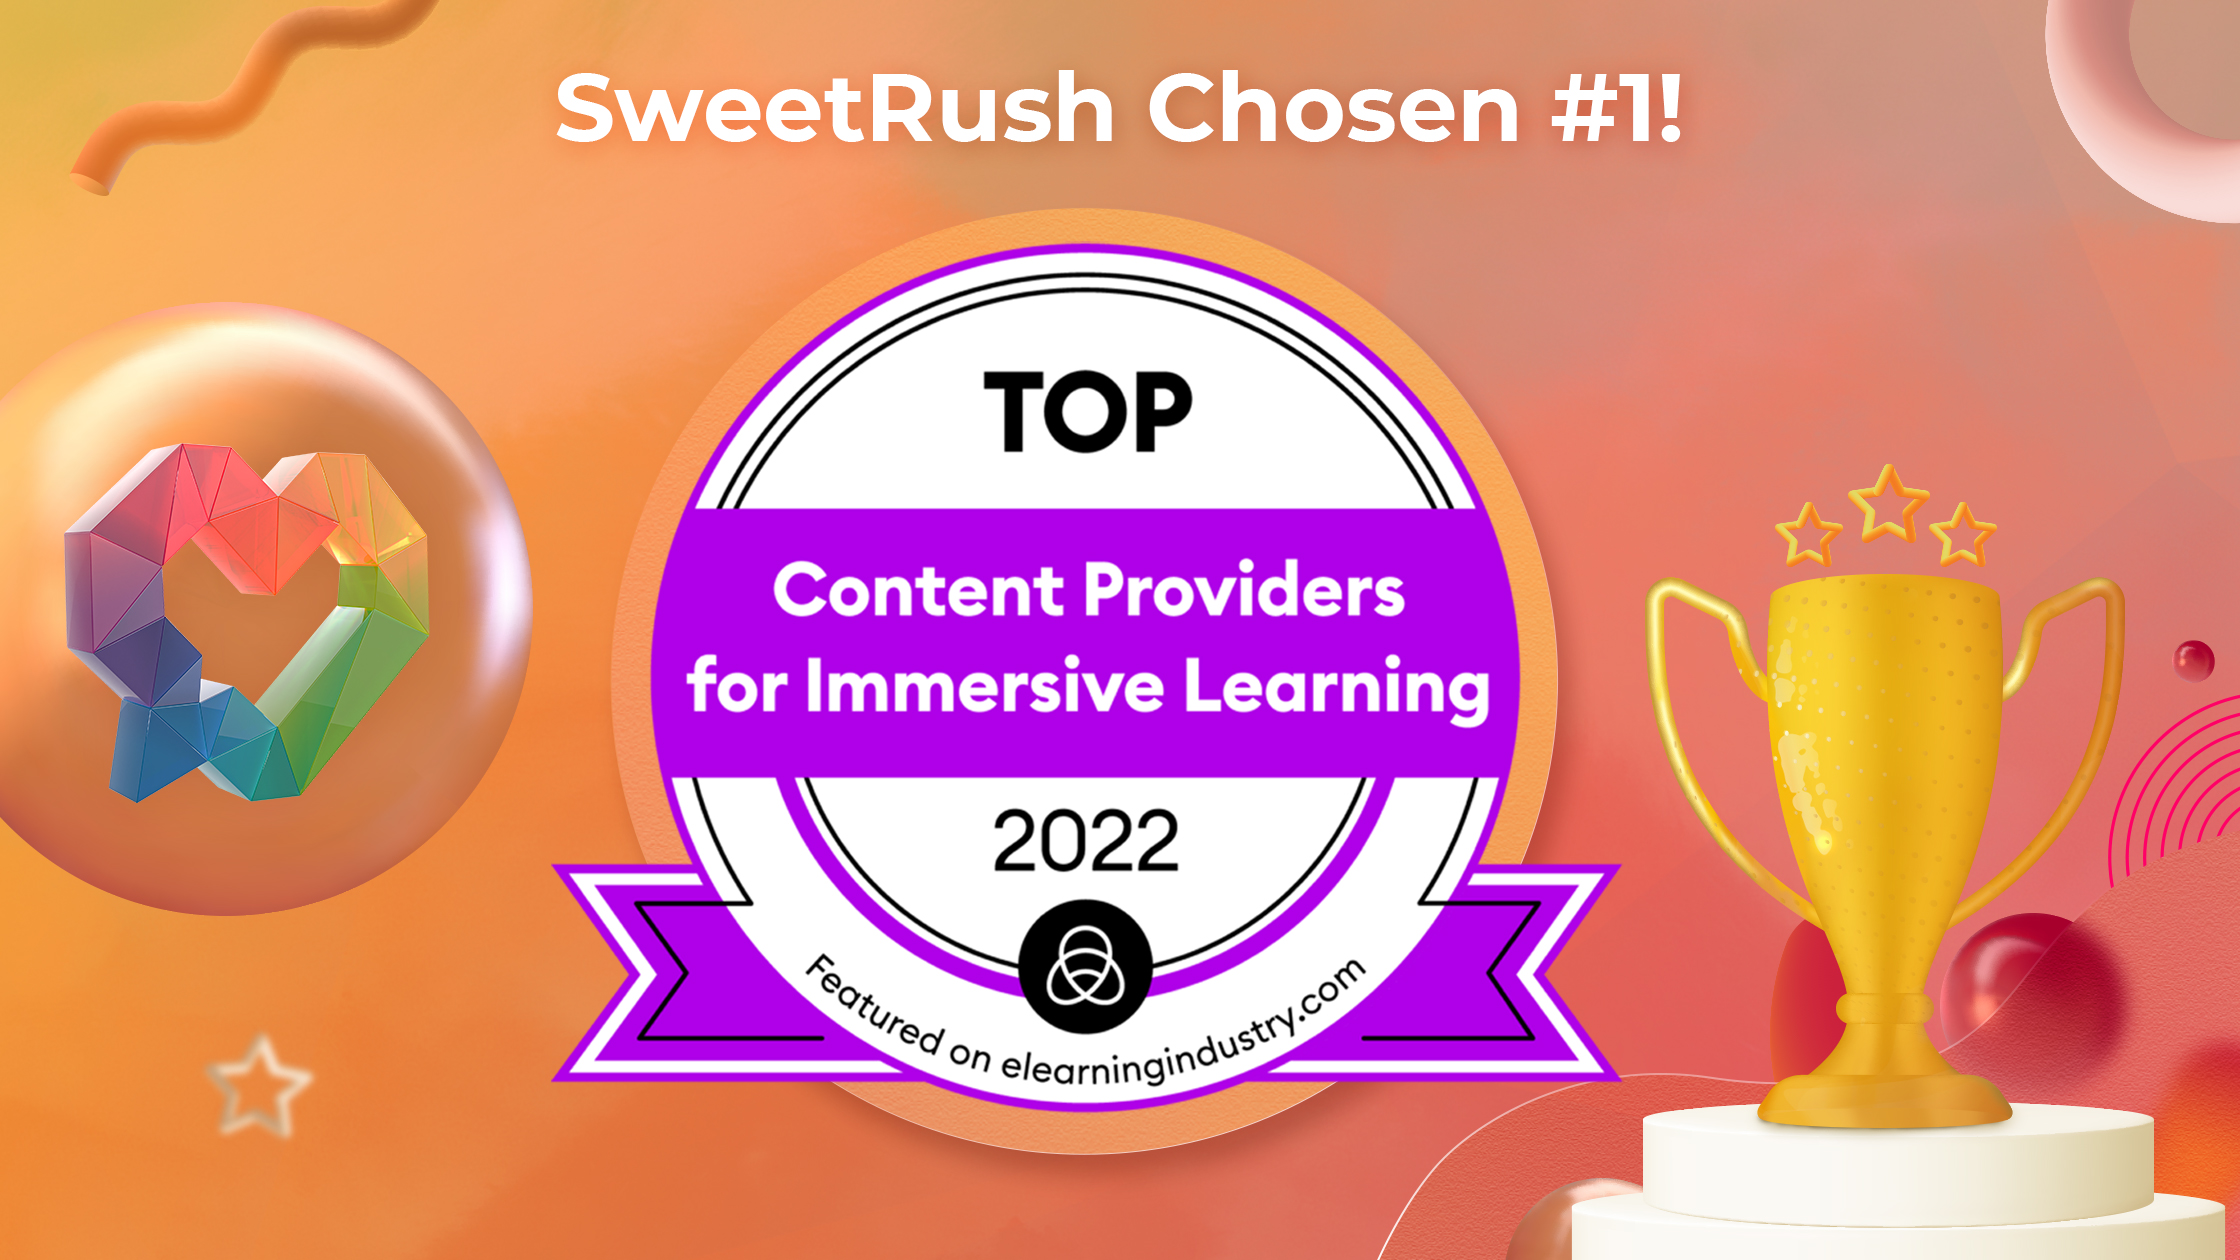 SweetRush Named No. 1 Content Provider for Immersive Learning